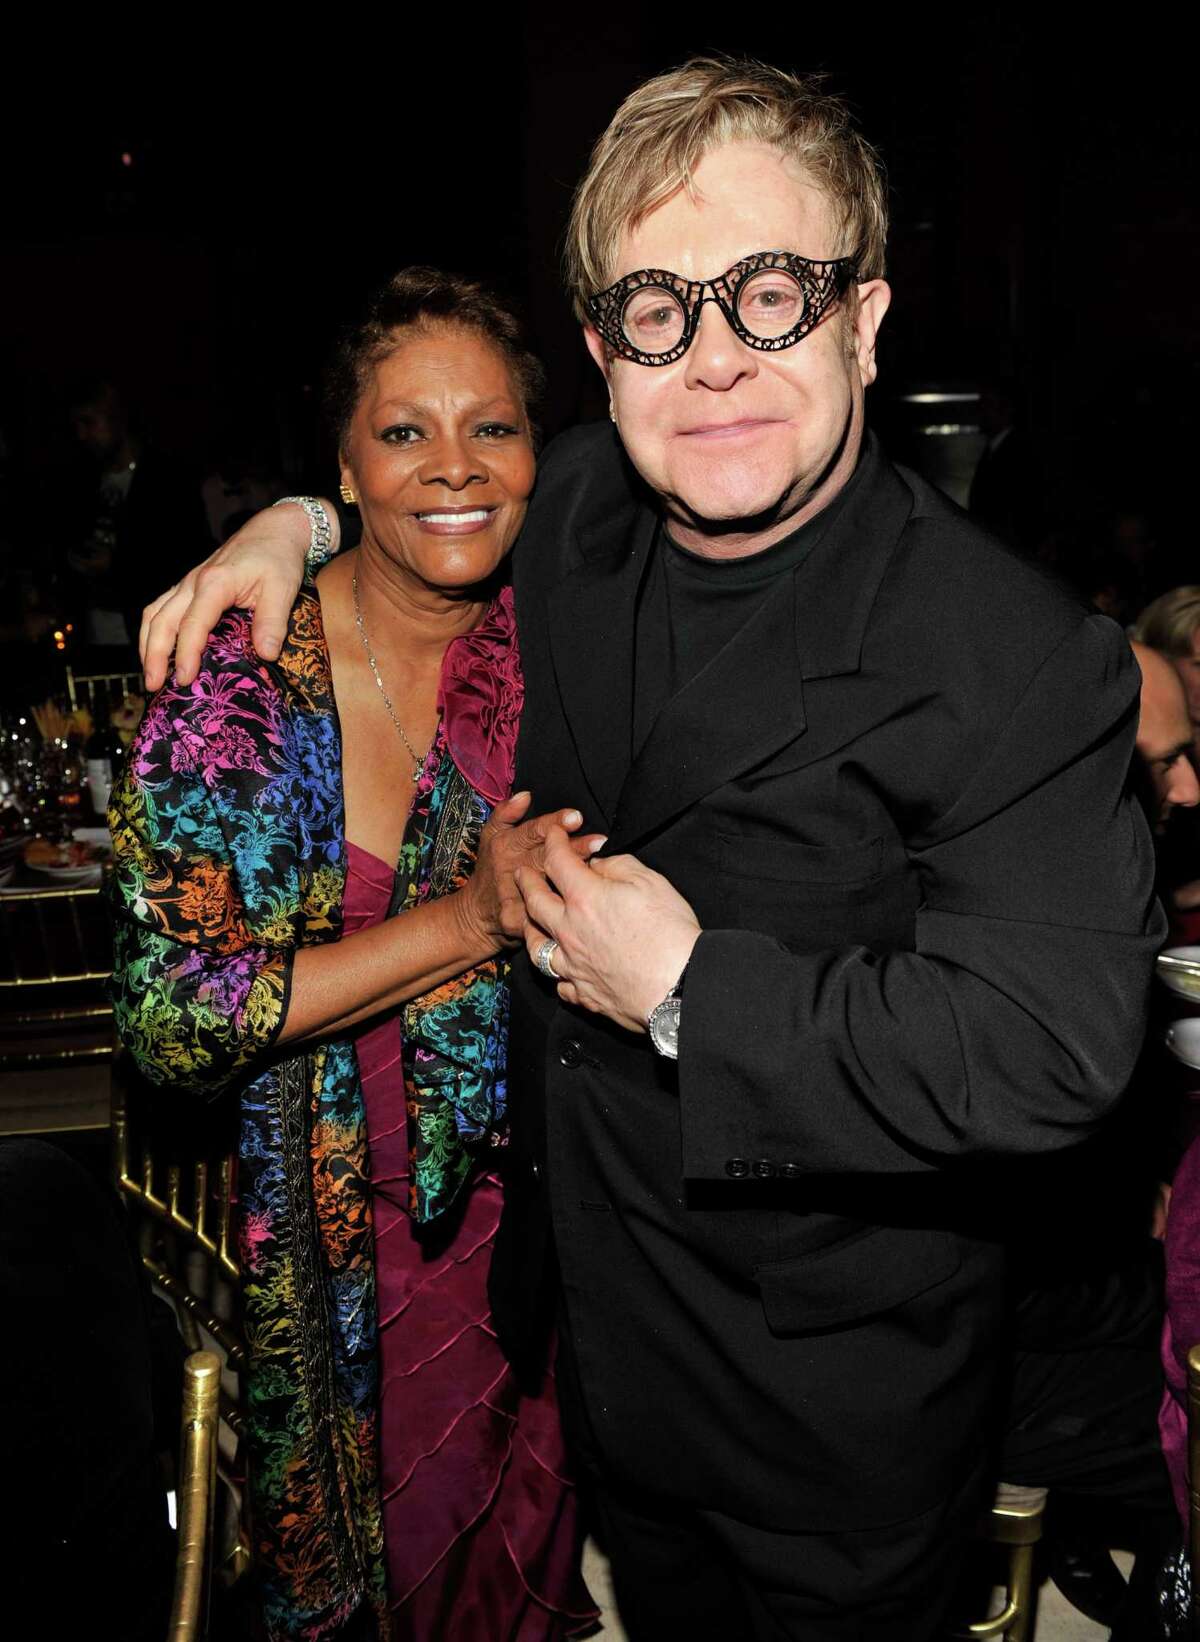 Best Elton Collaborators In the studio, Elton recorded No. 1 hits with John Lennon ("Whatever Gets You Thru the Night"), Neil Sedaka ("Bad Blood") and 1980s soul-pop royalty, including Dionne Warwick, Gladys Knight and Stevie Wonder (the AIDS-benefiting "That's What Friends Are For"). A live duet with George Michael on "Don't Let the Sun Go Down on Me" also hit the top of the charts.